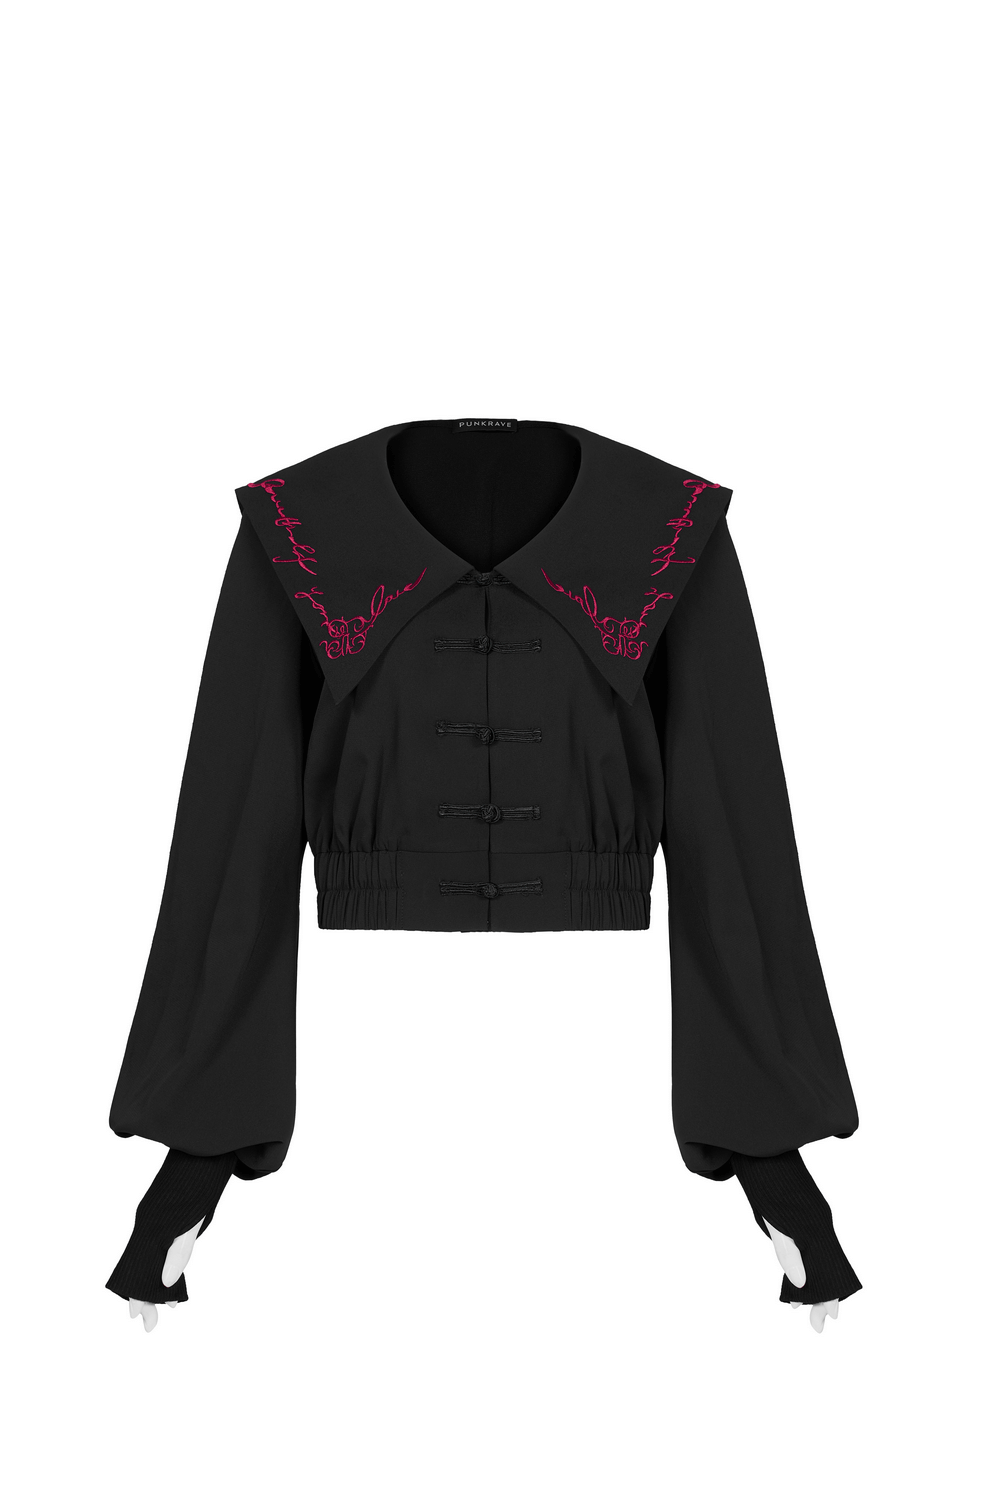 Navy Collar Embroidered Jacket - Chic And Unique